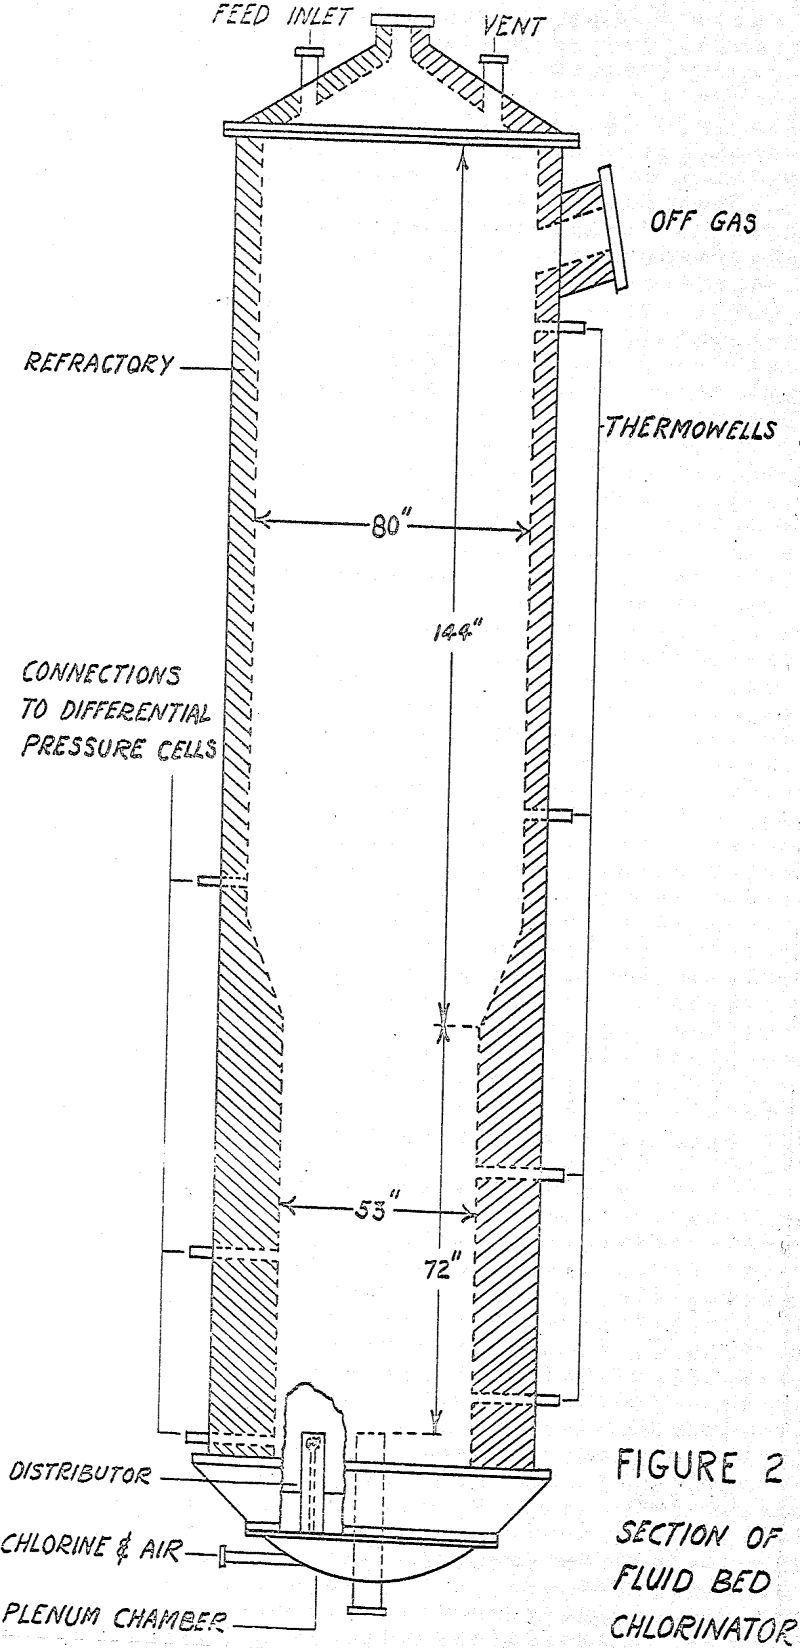 fluidized-bed-chlorination section